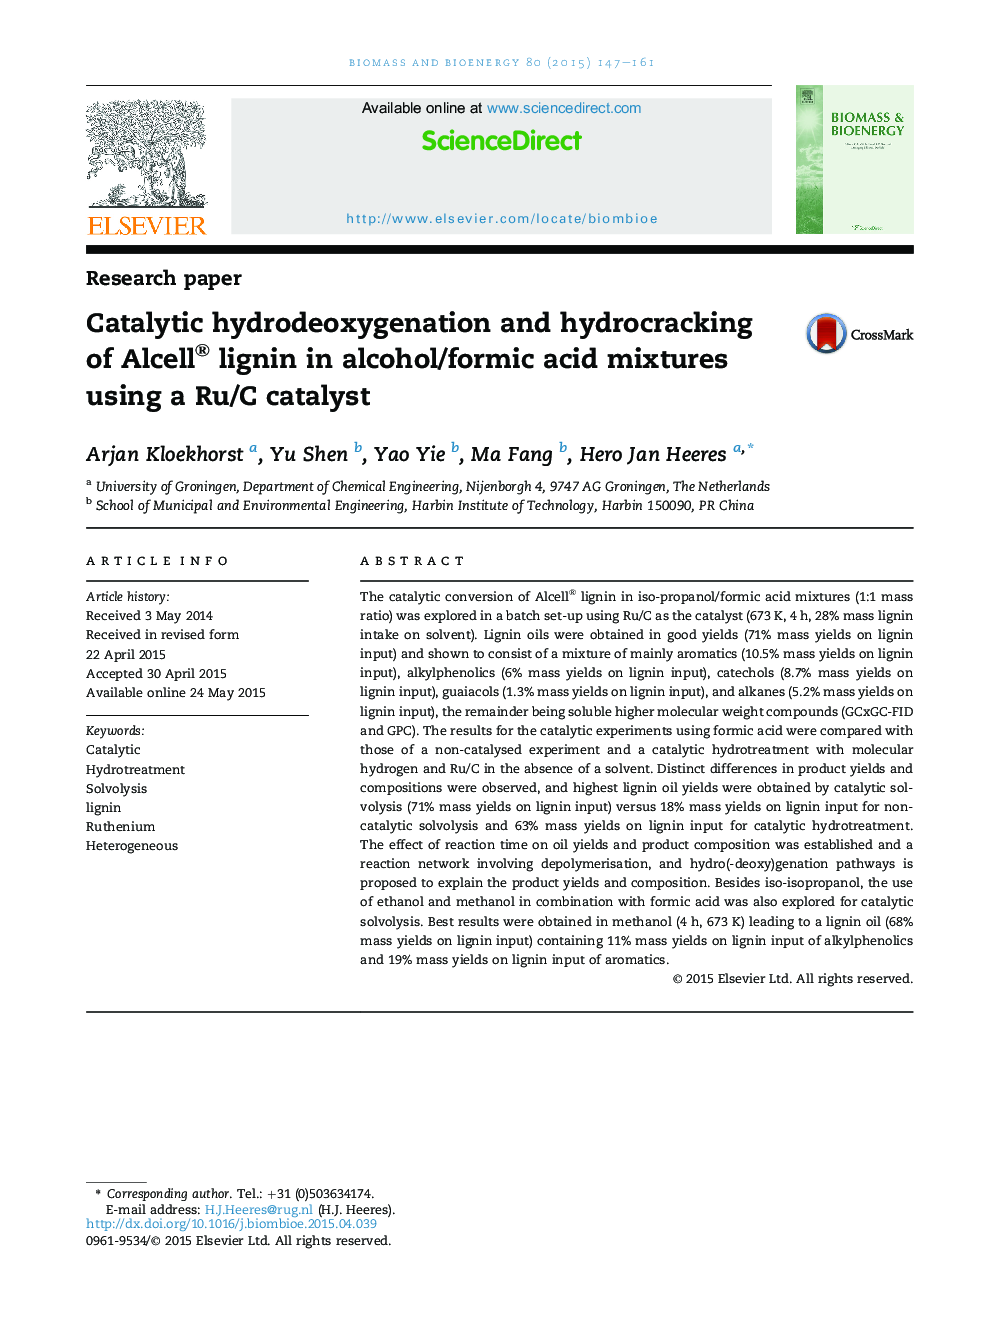 Catalytic hydrodeoxygenation and hydrocracking of Alcell® lignin in alcohol/formic acid mixtures using a Ru/C catalyst